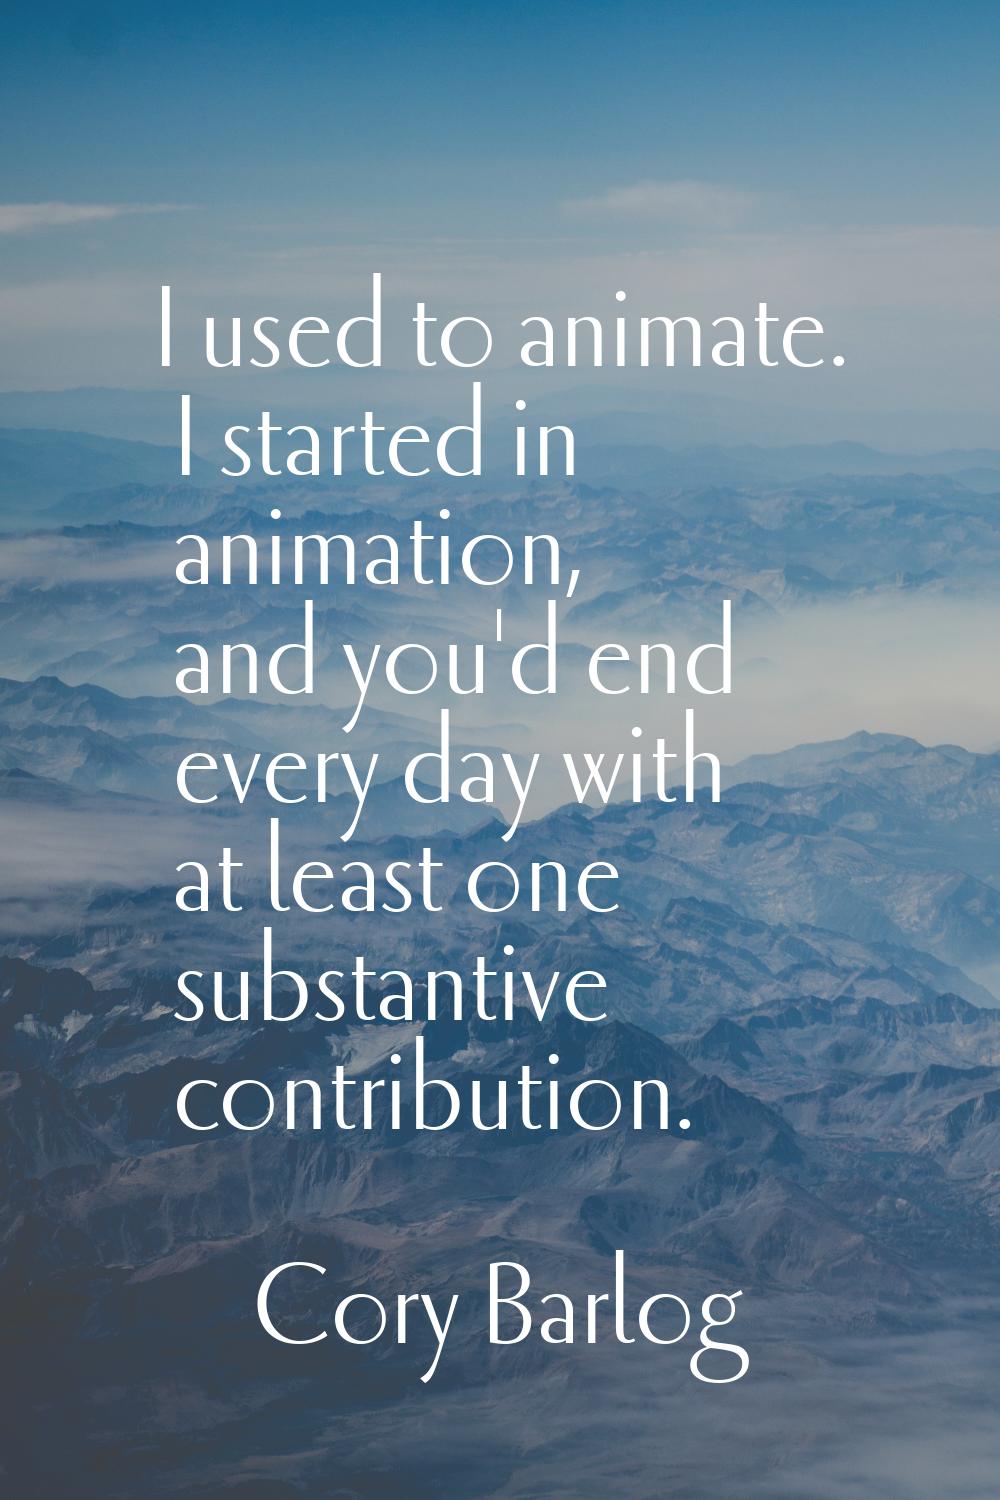 I used to animate. I started in animation, and you'd end every day with at least one substantive co